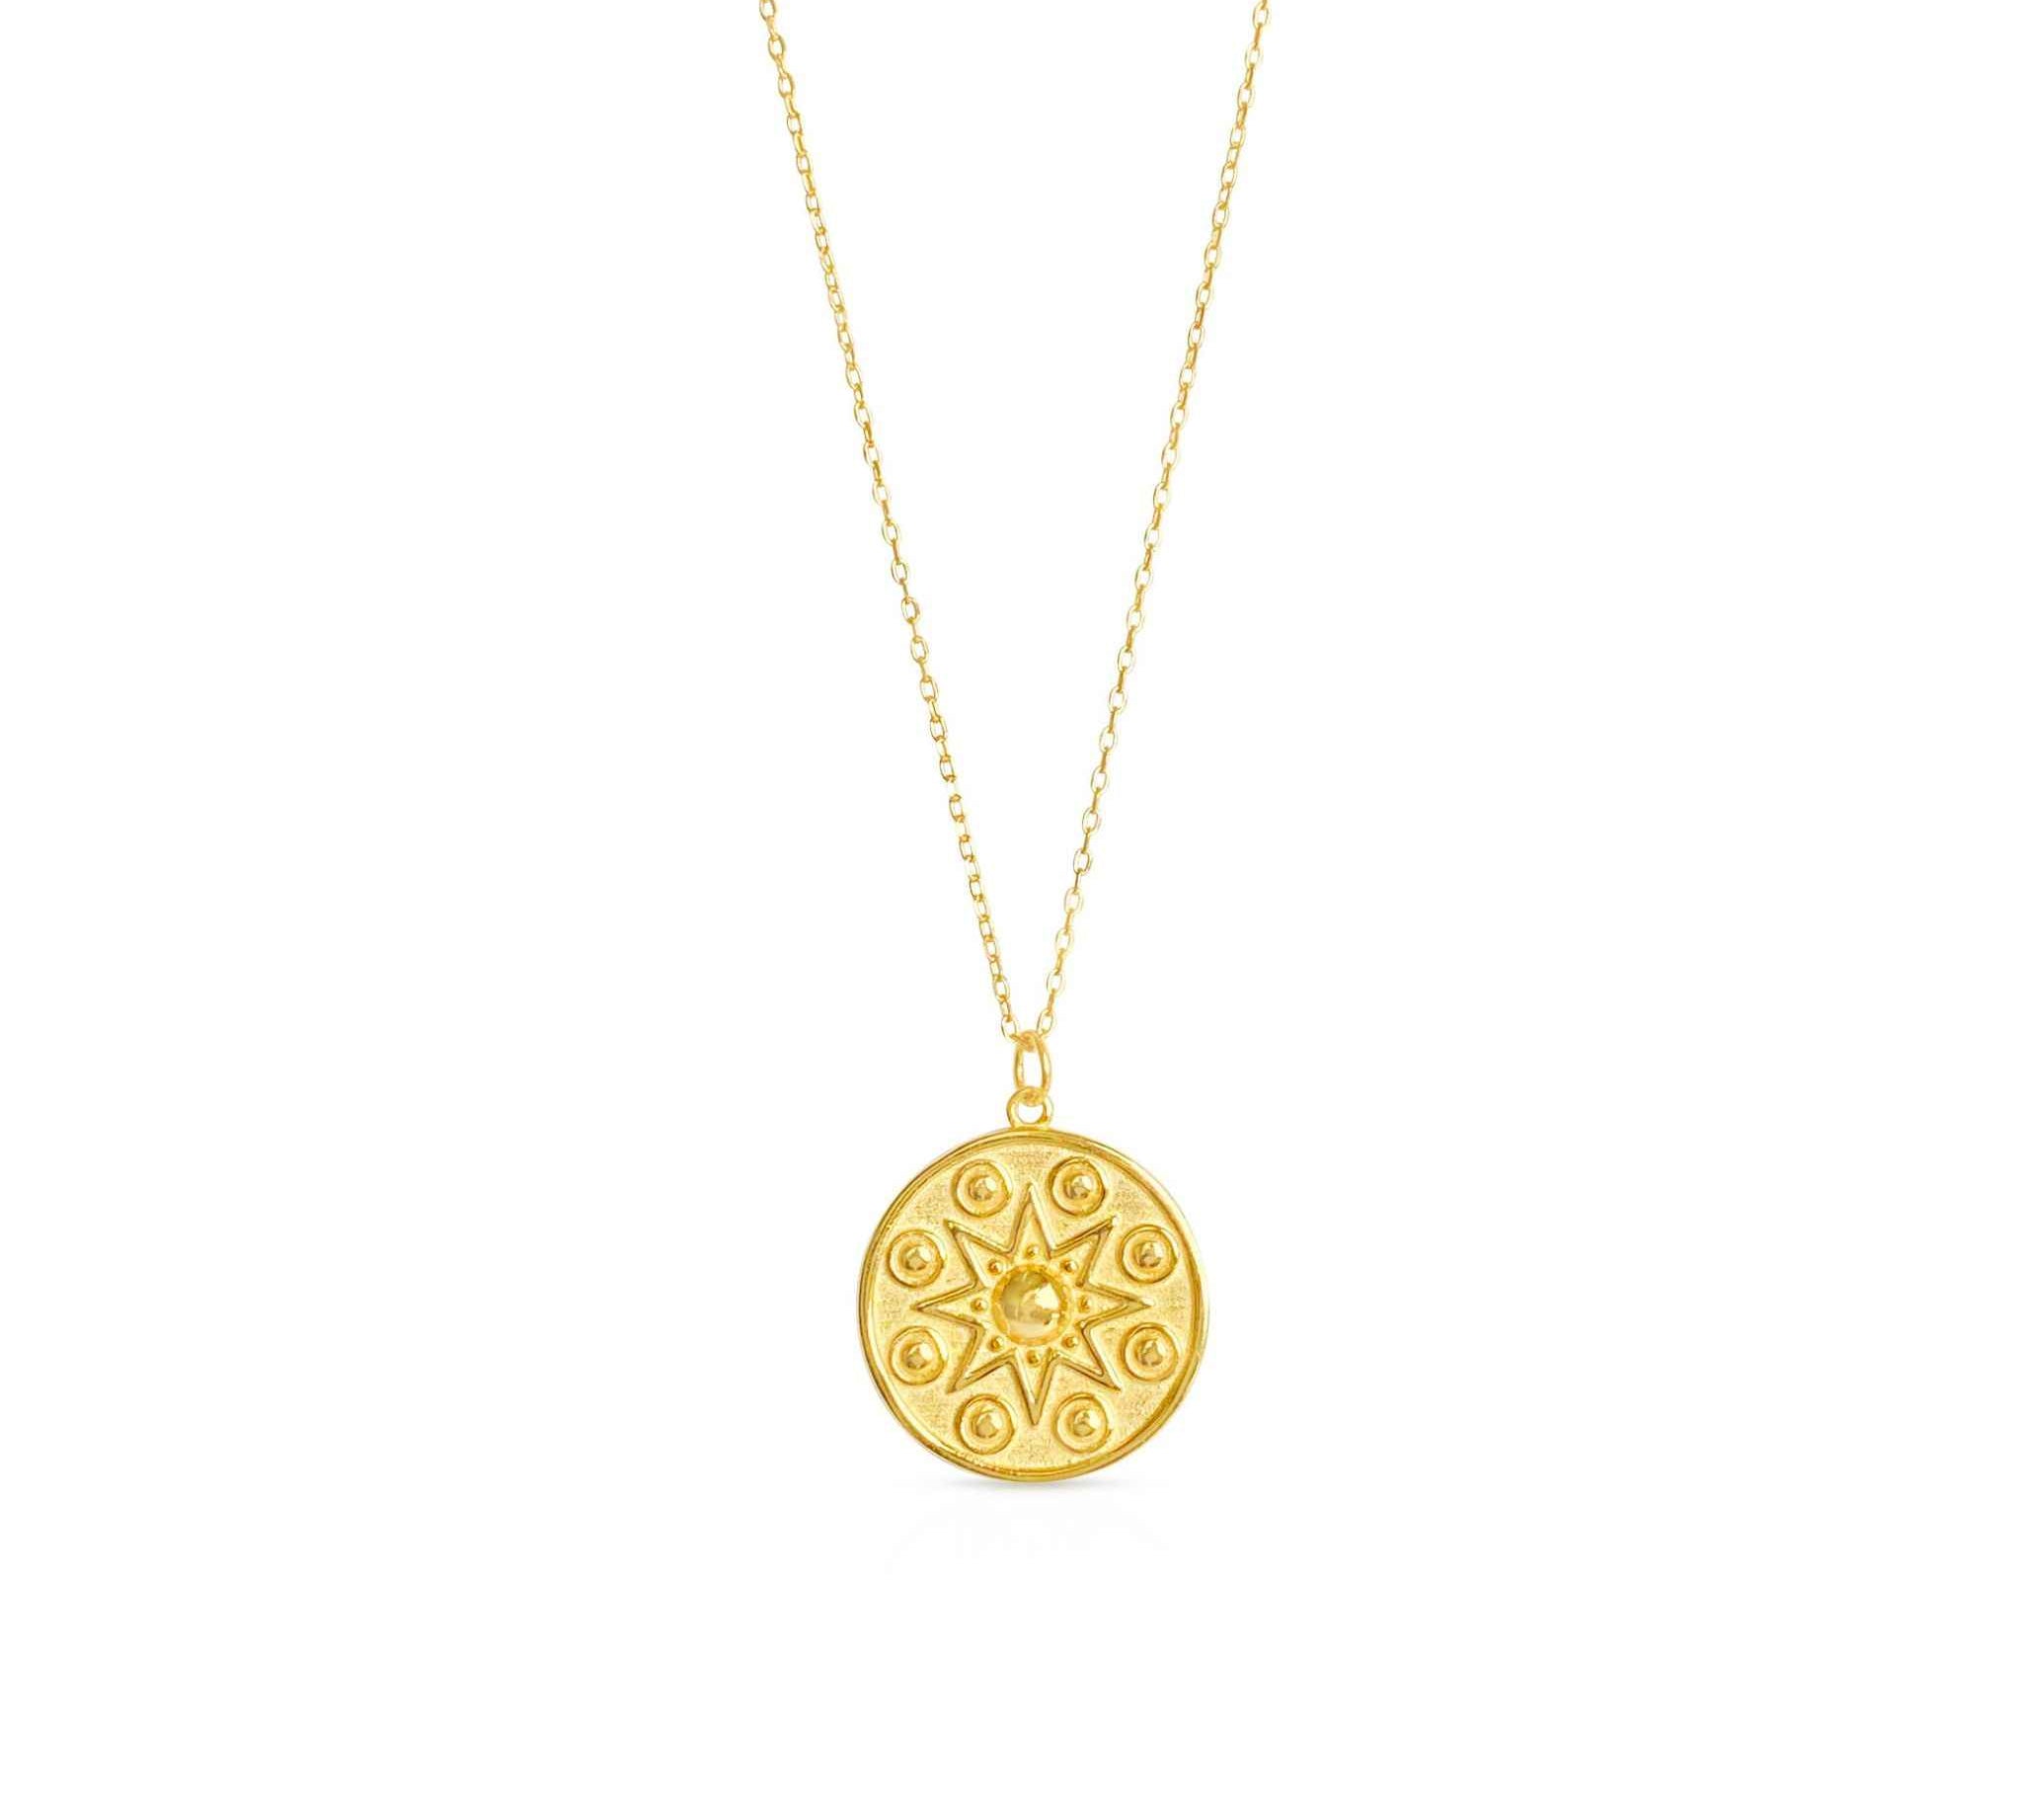 18k gold-plated sterling silver star pendant necklace symbolizing hope - Alessandra James quiet luxury jewelry.